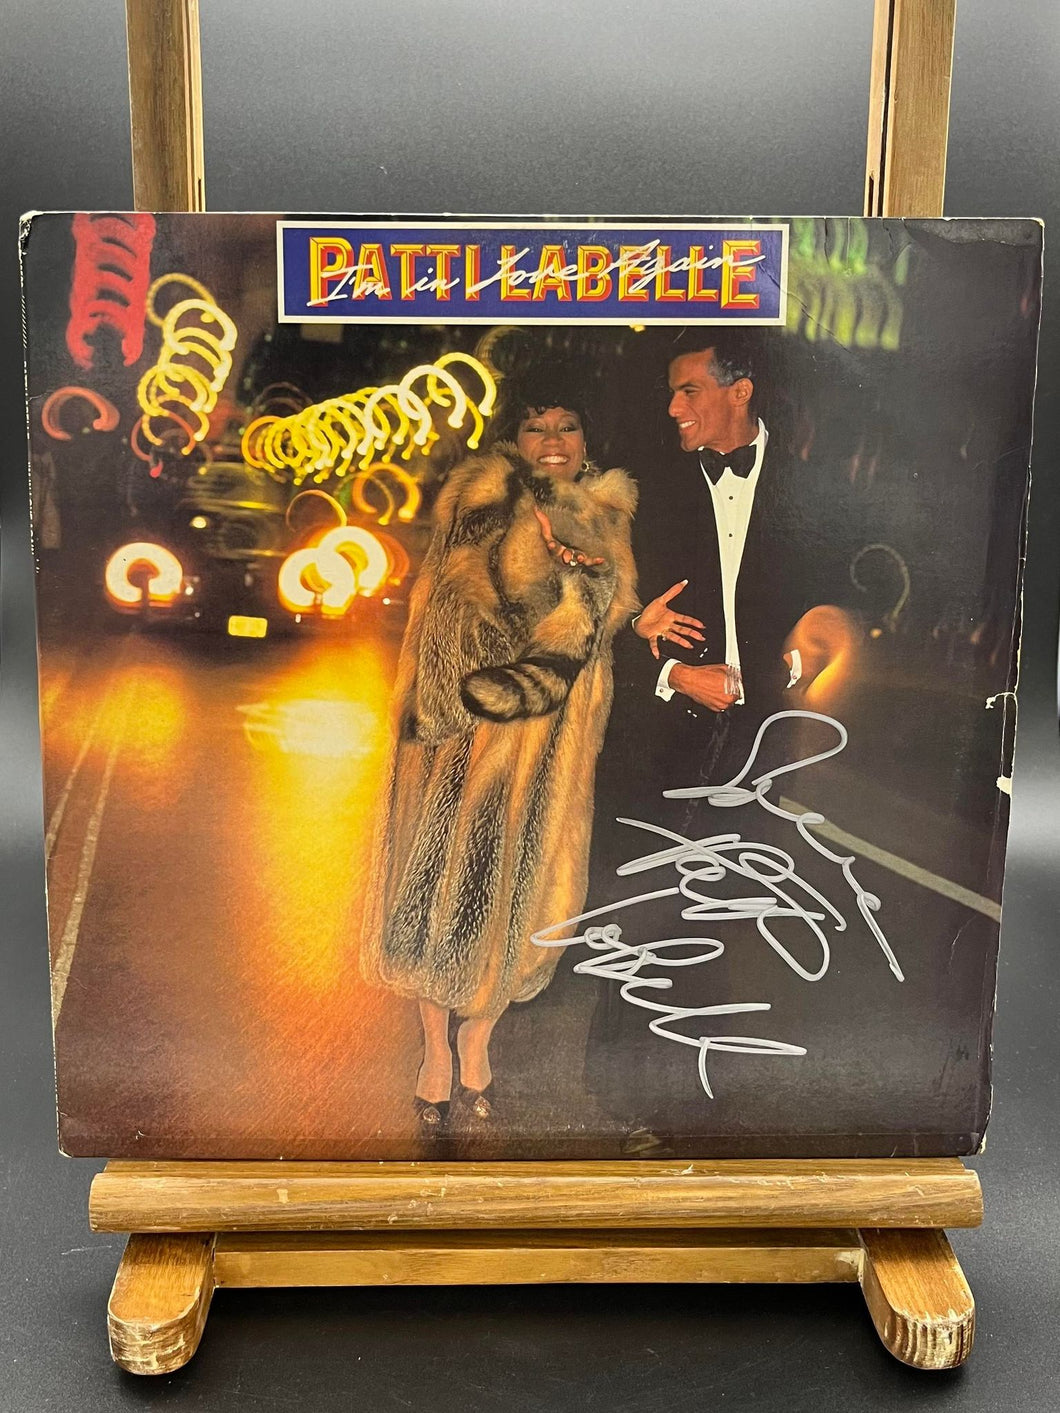 Patti LaBelle Vinyl Personally Signed by Patti LaBelle